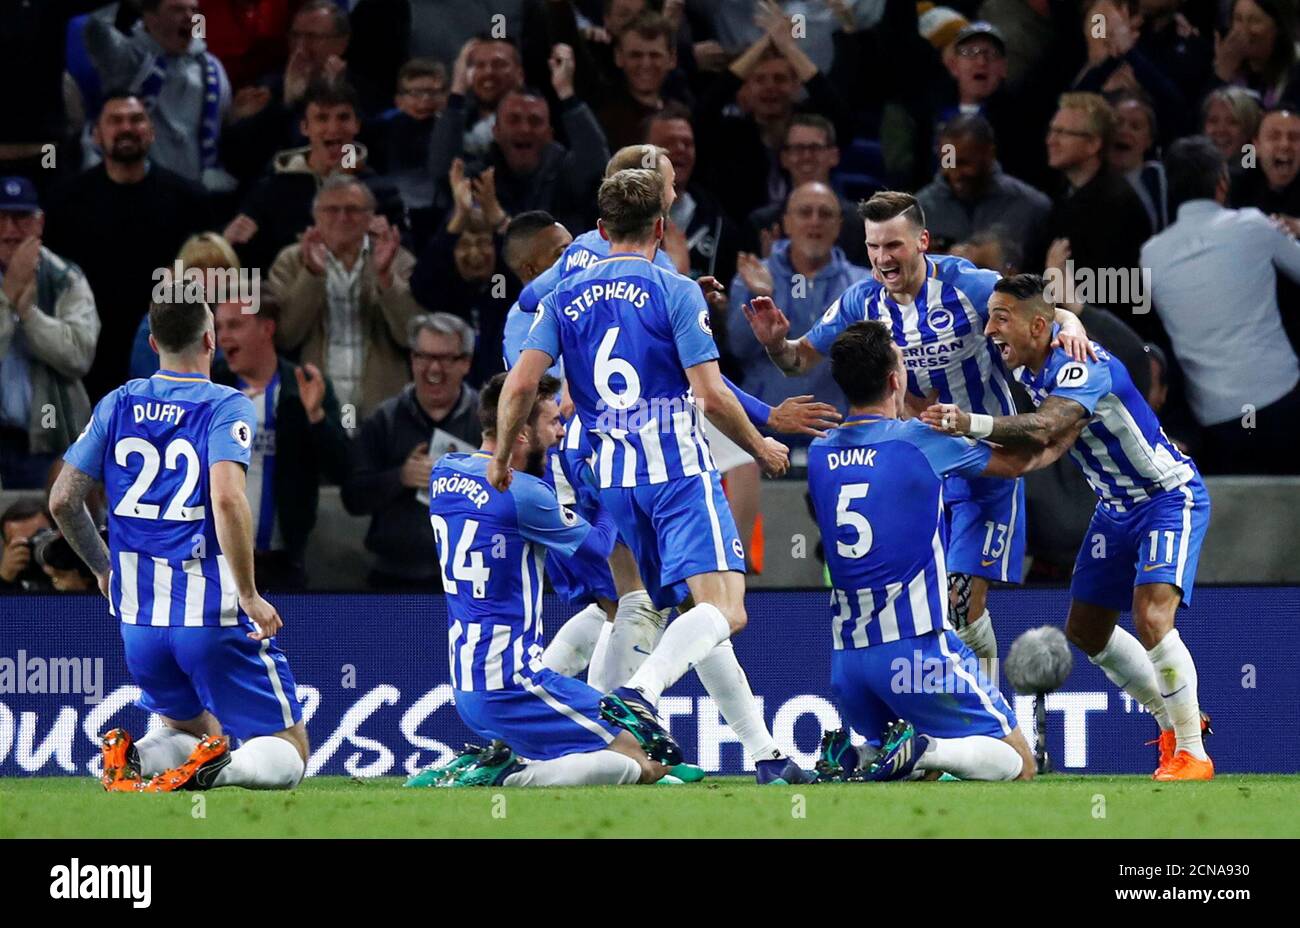 Soccer Football - Premier League - Brighton & Hove Albion v Manchester United - The American Express Community Stadium, Brighton, Britain - May 4, 2018   Brighton's Pascal Gross celebrates scoring their first goal with teammates   REUTERS/Eddie Keogh    EDITORIAL USE ONLY. No use with unauthorized audio, video, data, fixture lists, club/league logos or 'live' services. Online in-match use limited to 75 images, no video emulation. No use in betting, games or single club/league/player publications.  Please contact your account representative for further details. Stock Photo